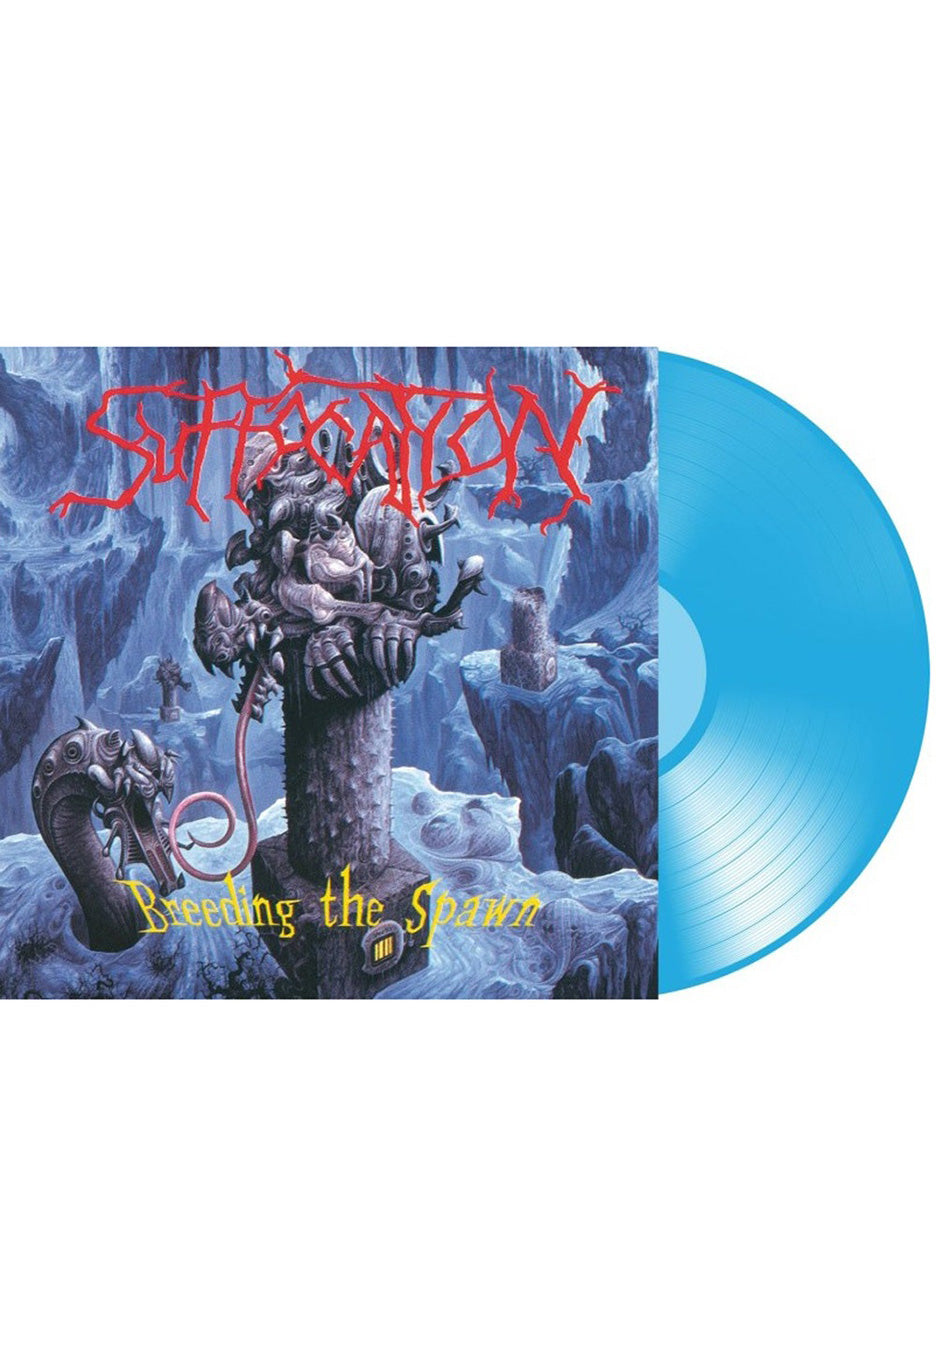 Suffocation - Breeding The Spawn Transparent Blue - Colored Vinyl